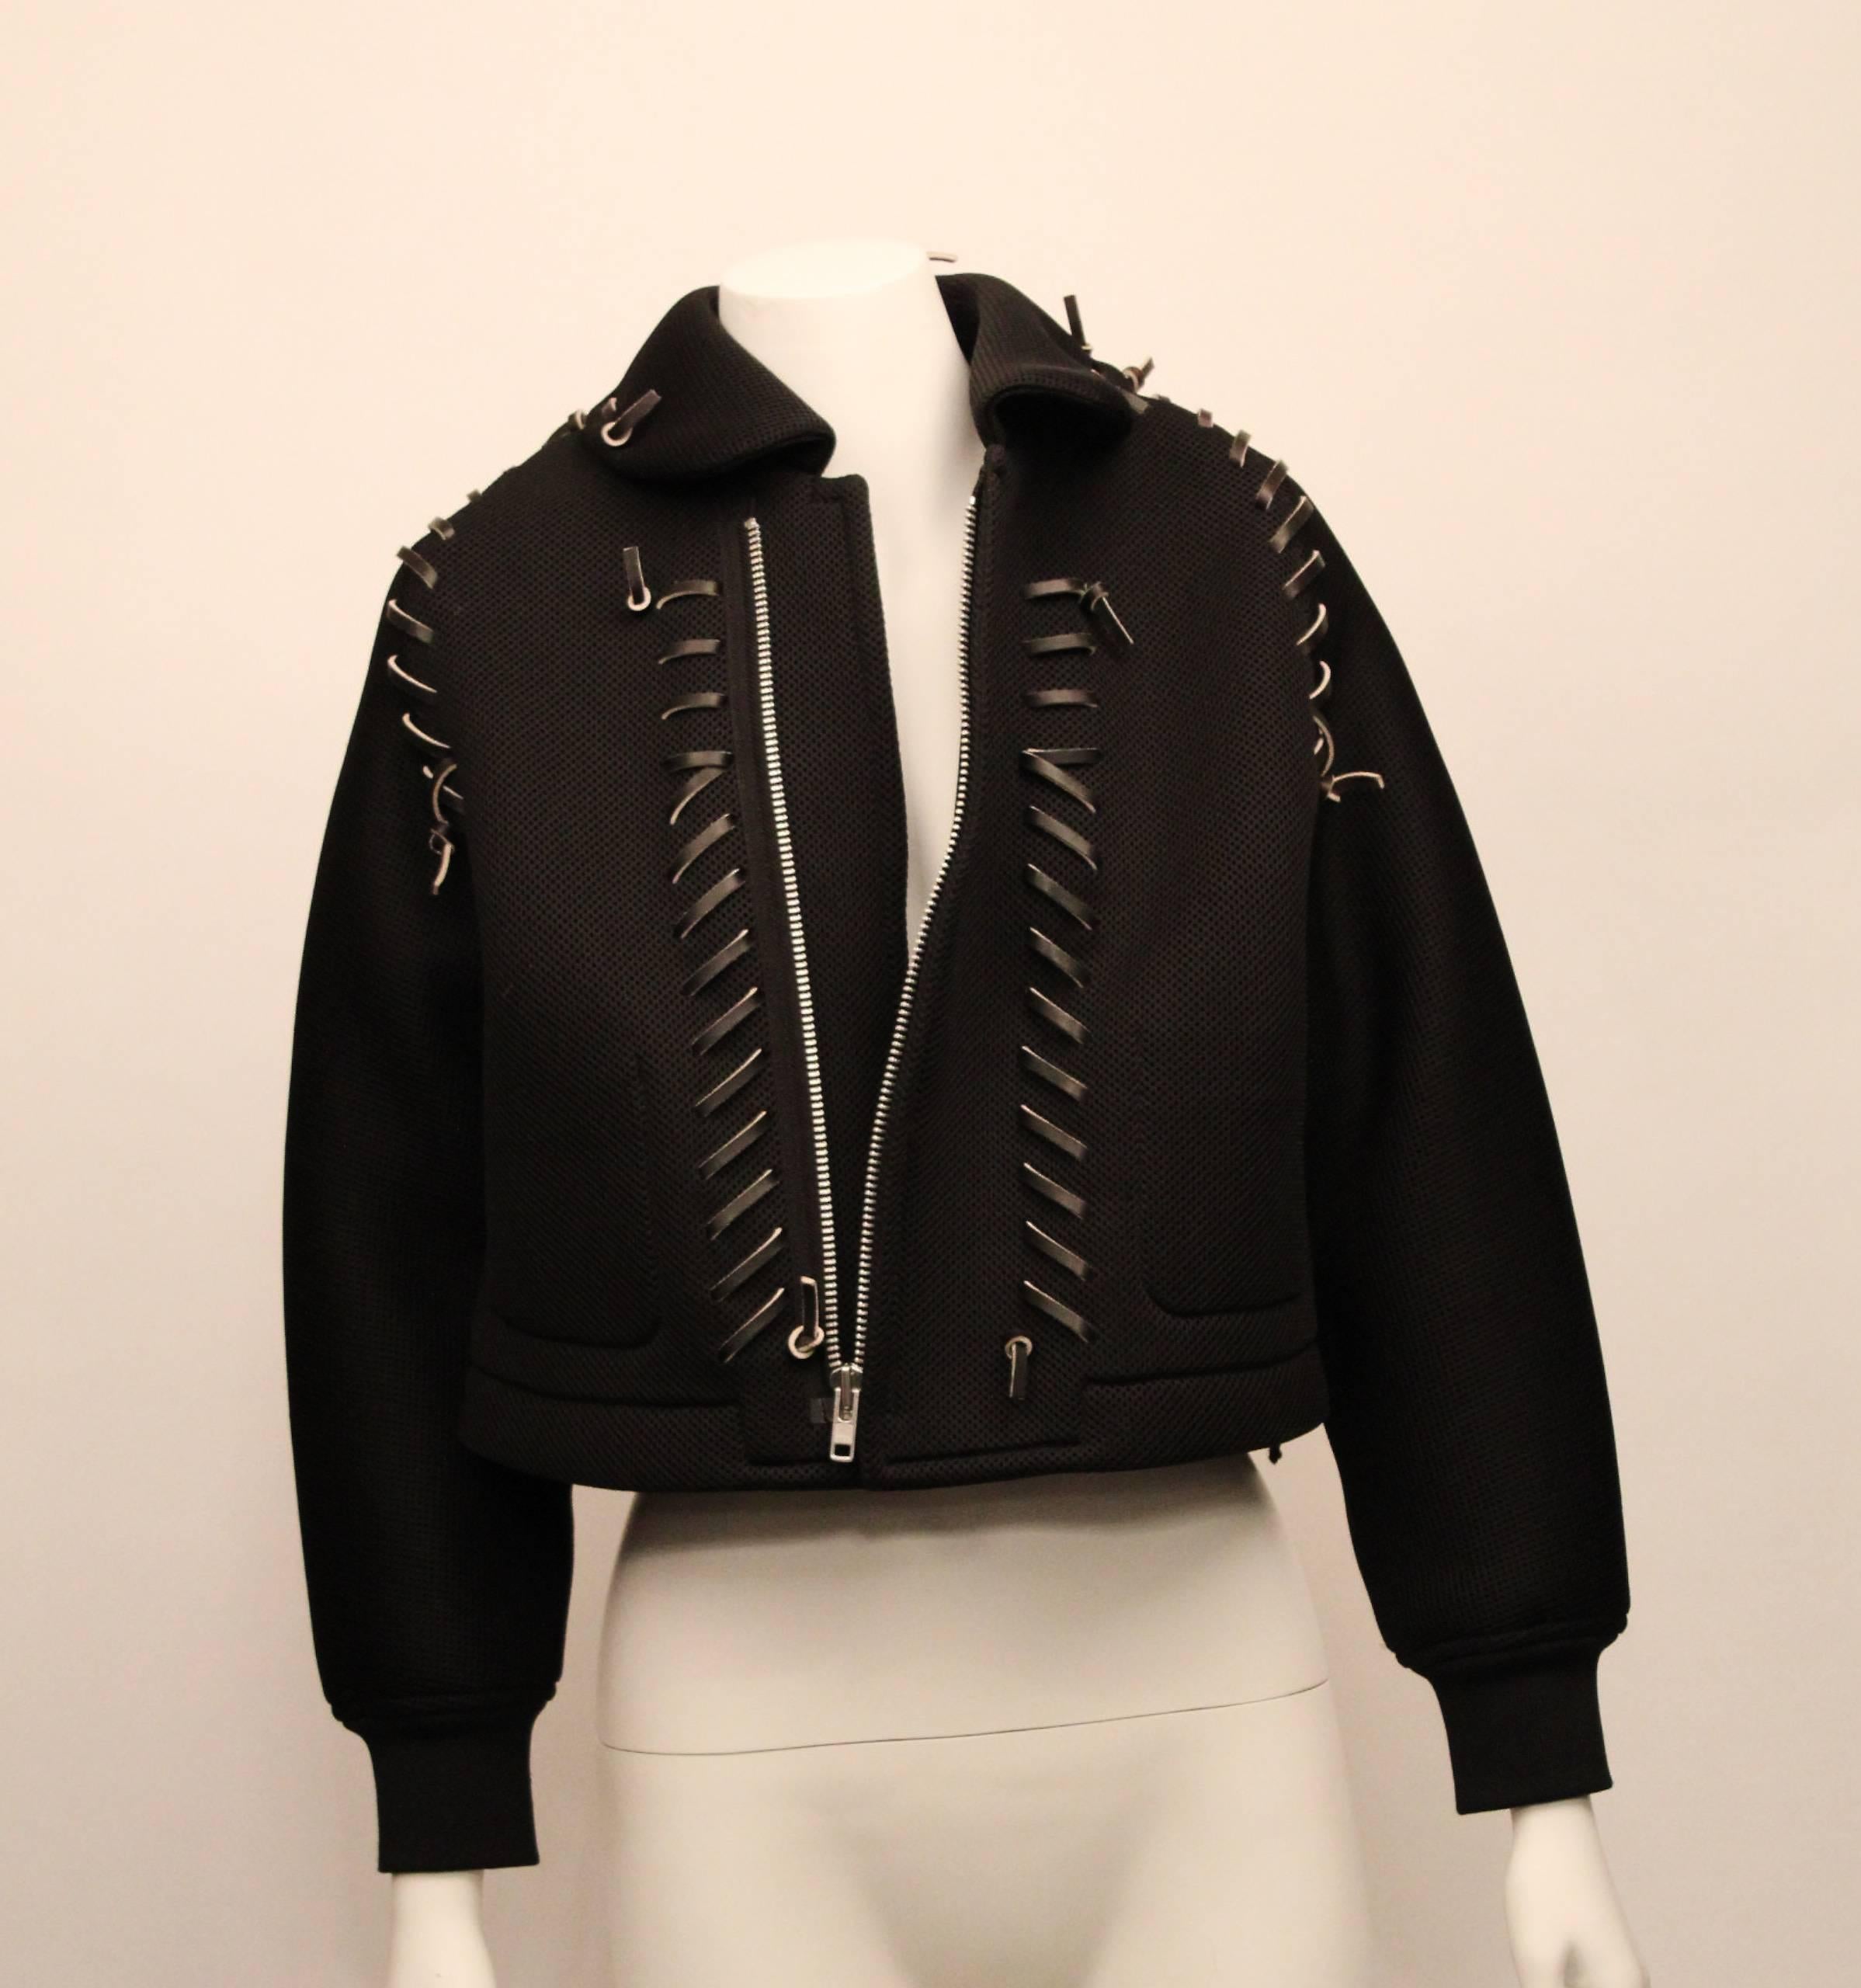 COMME DES GARCONS mesh cropped jacket from the 2004 runway collection. 
A true collectors item, this jacket was recently featured at the Met Museum's CDC exhibition.
Black mesh neoprene with dark chocolate cowhide decorative trim and statement